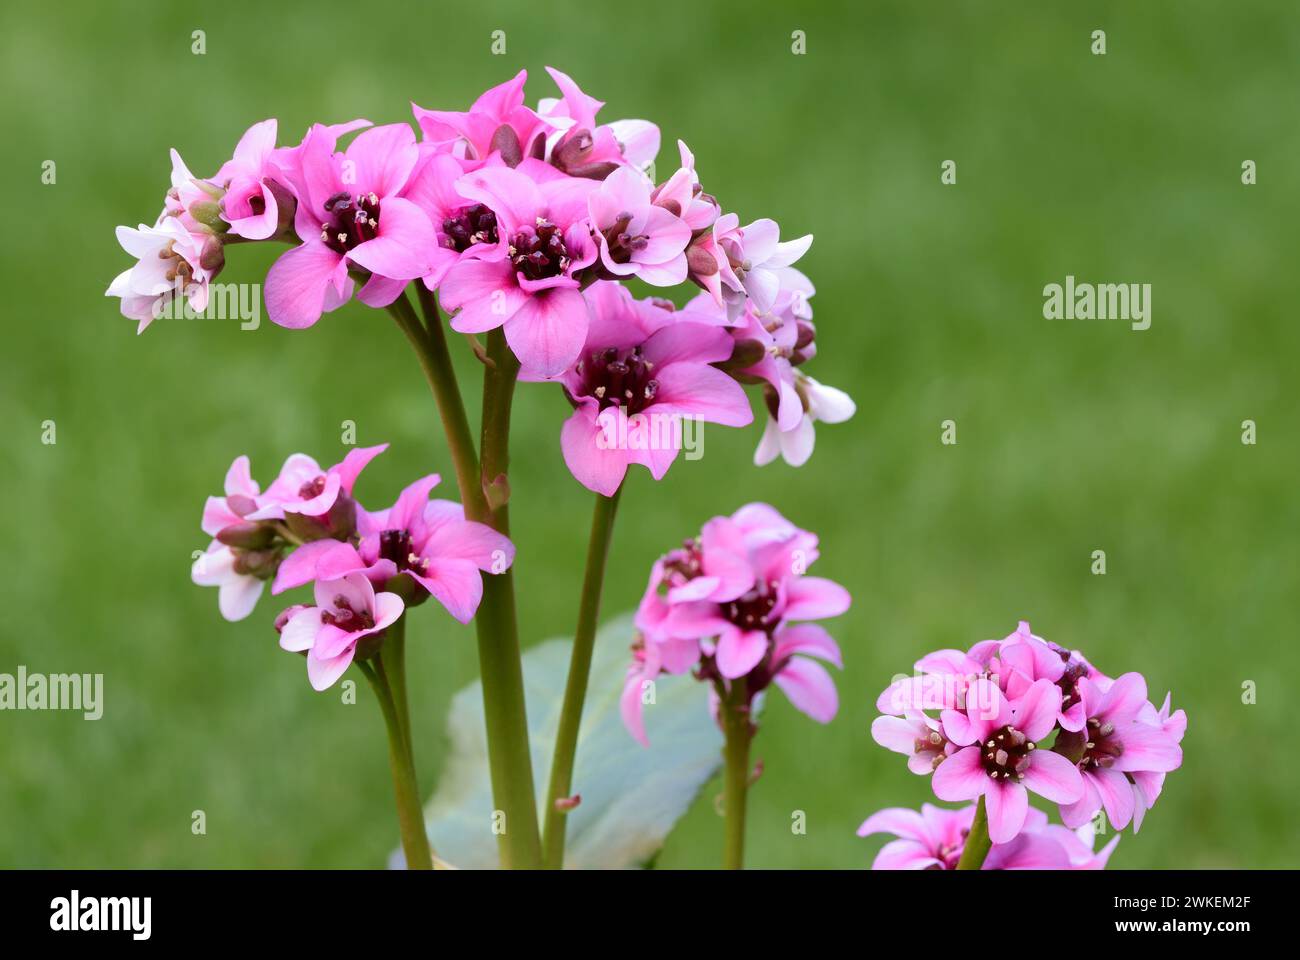 Bergenia flowers, Dragonfly sakura, closeup. Ornamental plant, perennial with pink petals. Blurred green background, copy space. Trencin, Slovakia Stock Photo